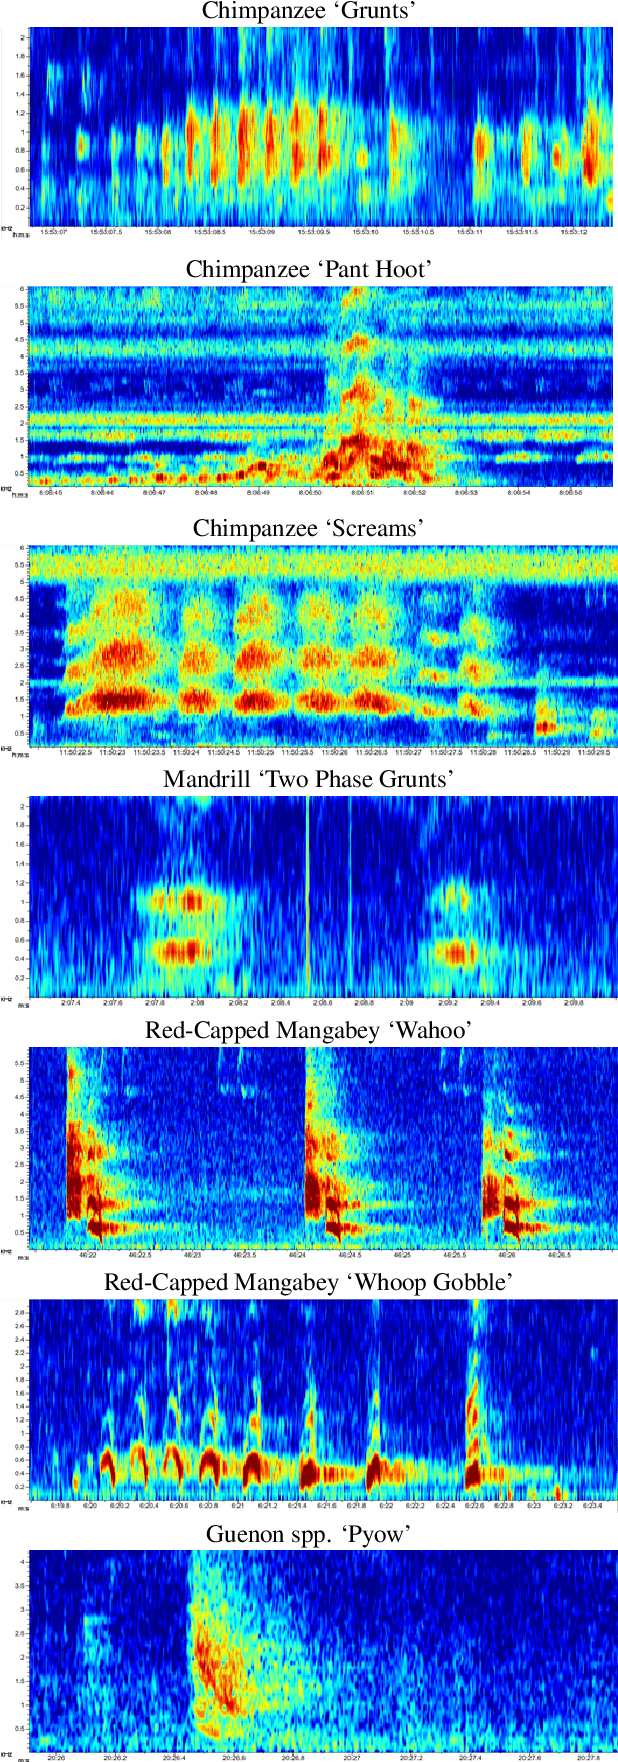 Figure 3 for Introducing a Central African Primate Vocalisation Dataset for Automated Species Classification